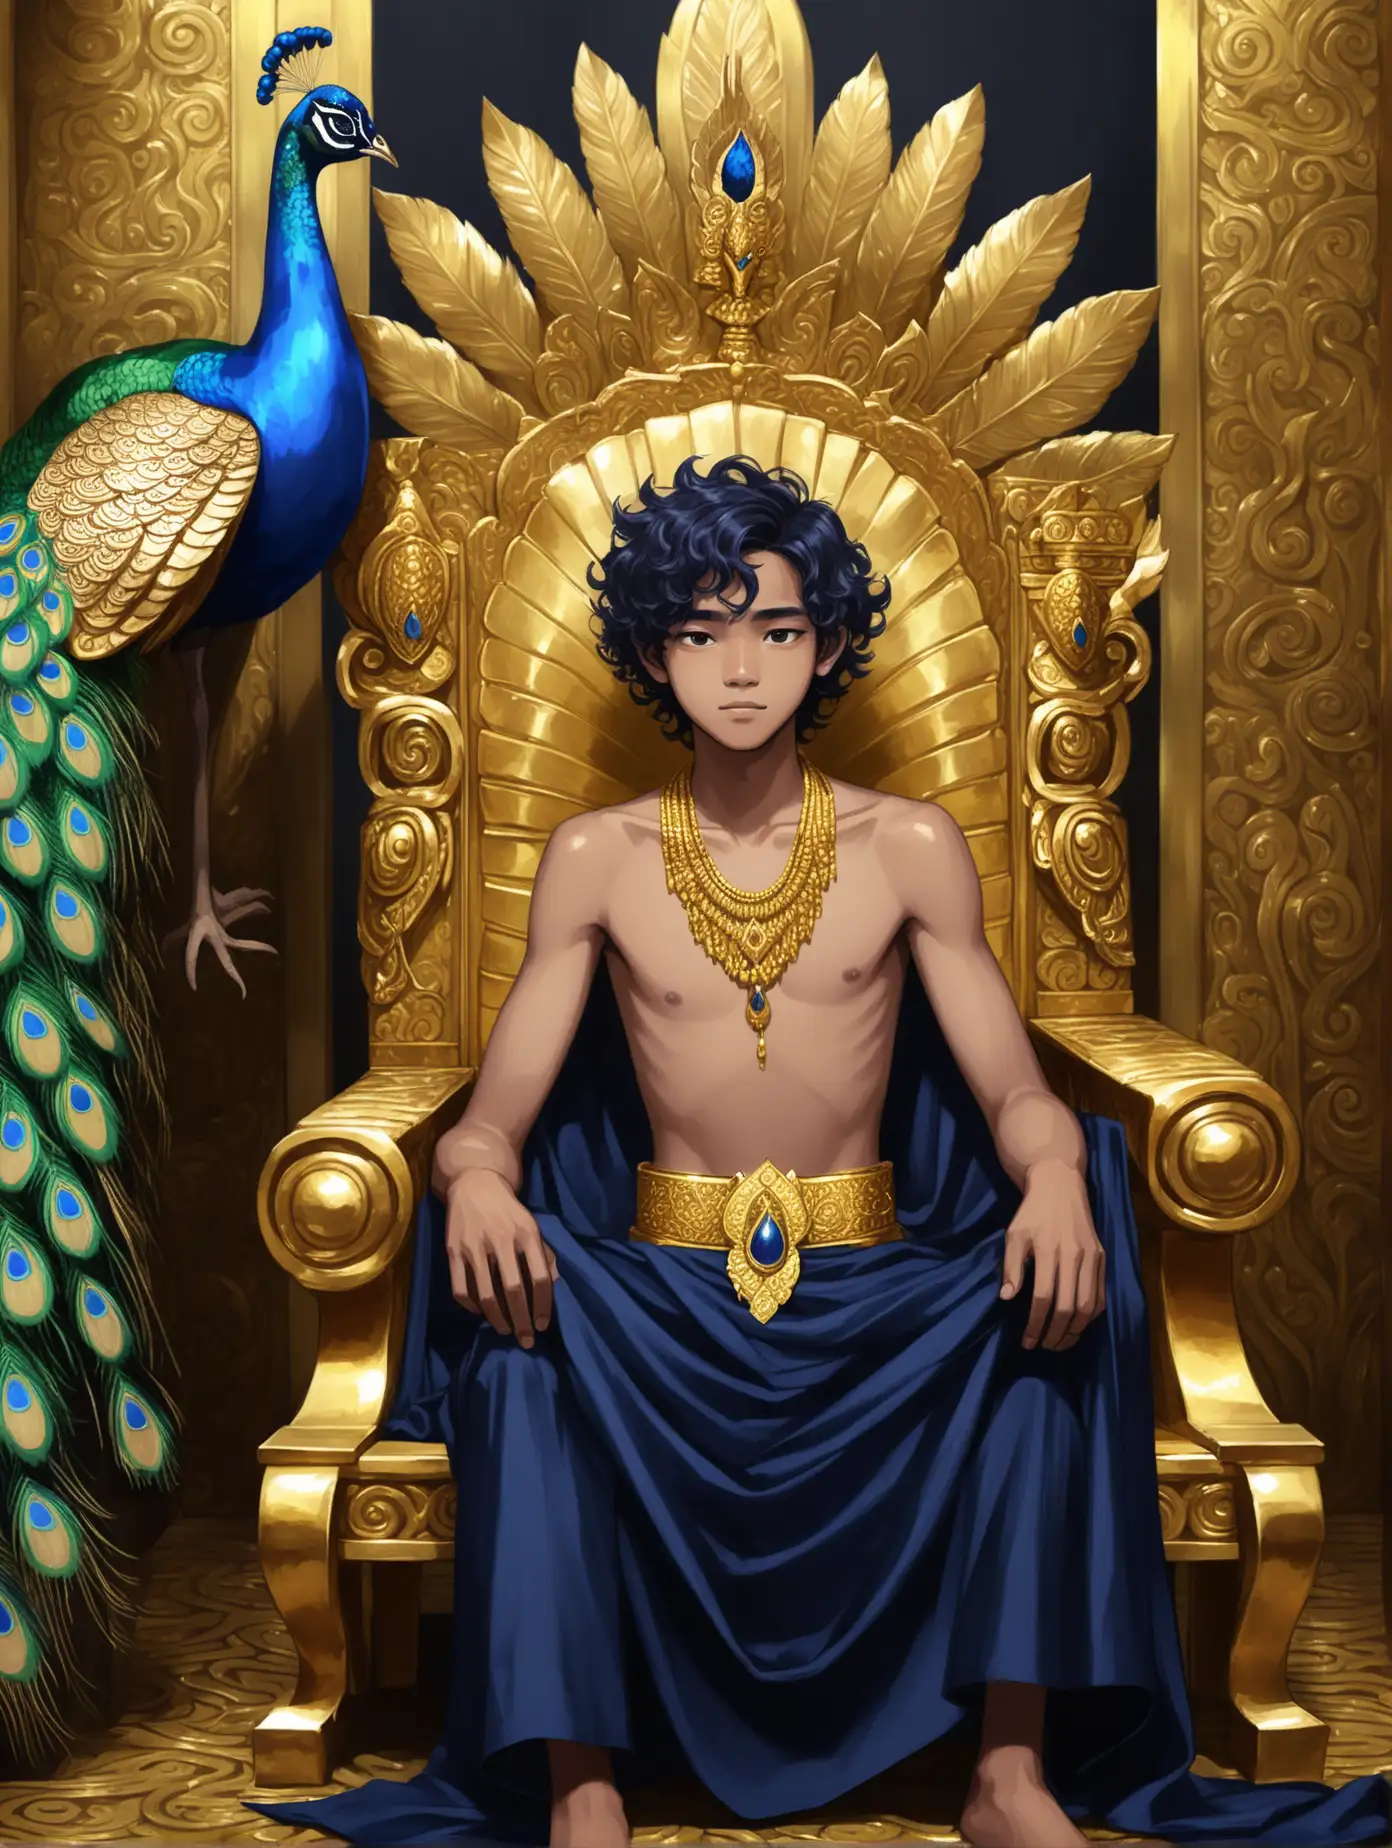 a 17 year old Indonesian man, wavy hair, shirtless, sitting on a golden throne wearing dark blue cloth, ancient Indonesian clothes, with gold jewelry, and a peacock by his side